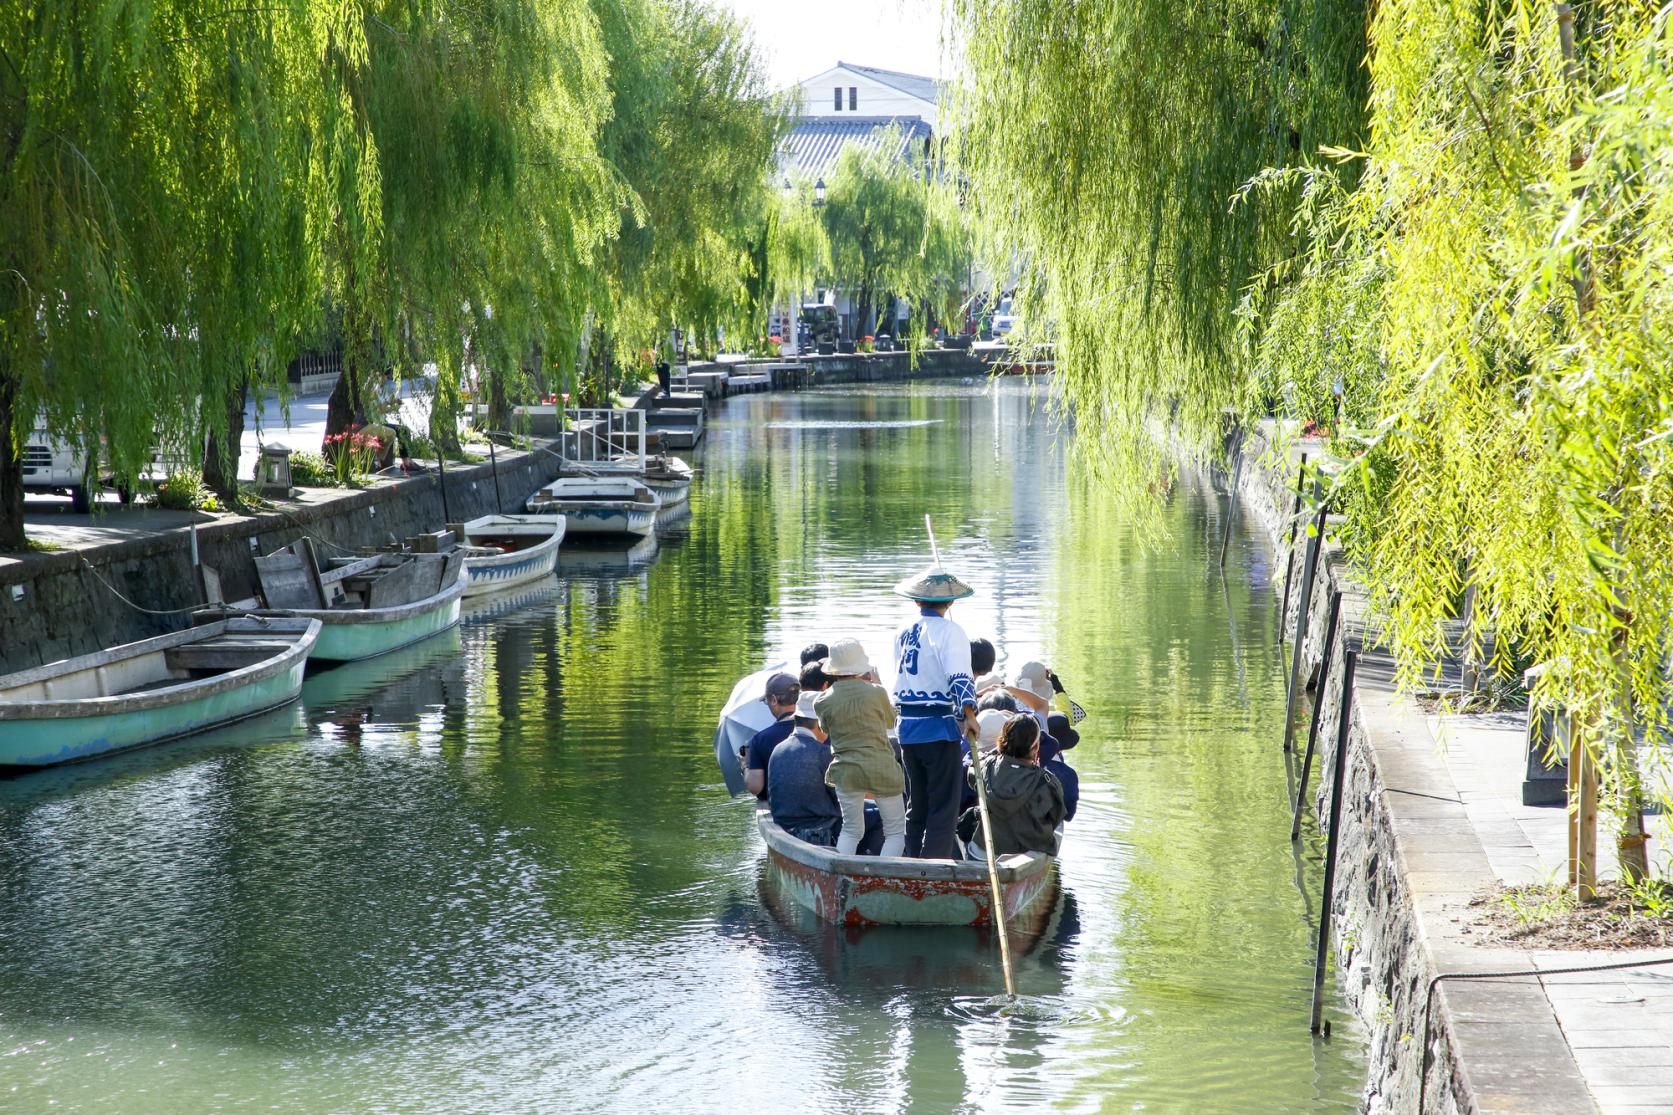 Why not try river cruising as one of the best ways to enjoy the Yanagawa area! Here’s some great tips on food and seasonal fun!